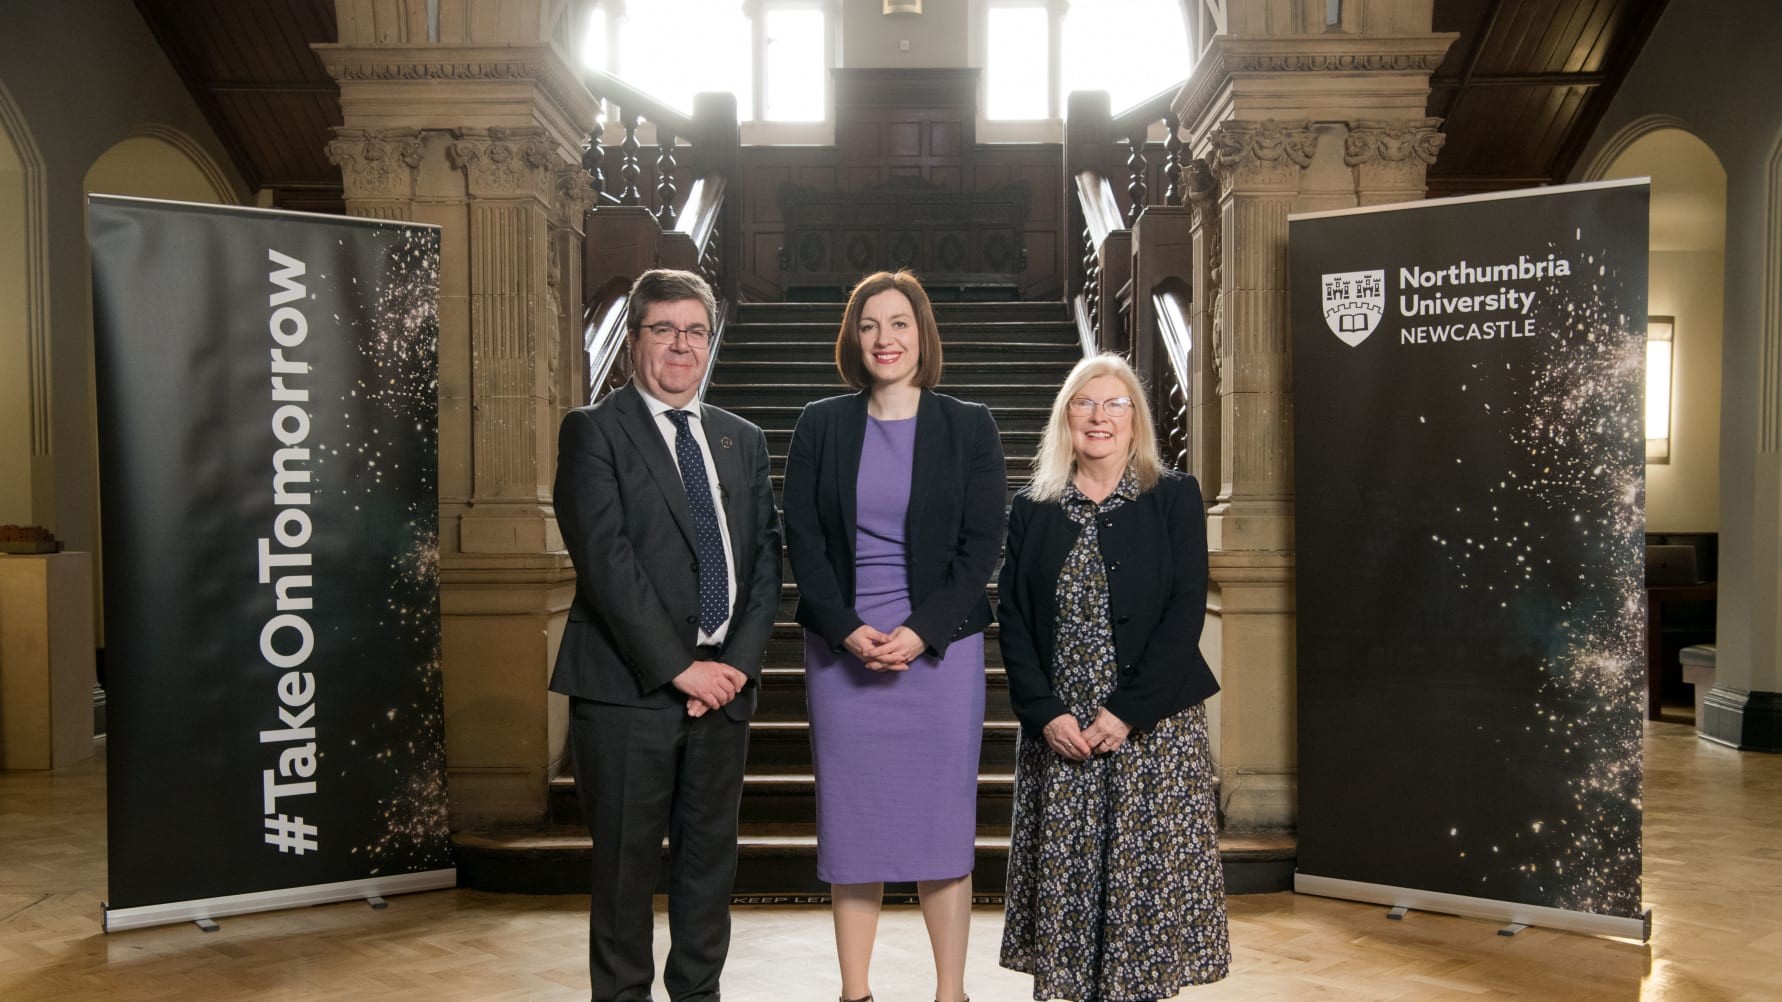 Professor Andy Long, Bridget Phillipson and Dr Roberta Blackman-Woods stood in front of old staircase with Northumbria University banners flanking either side.